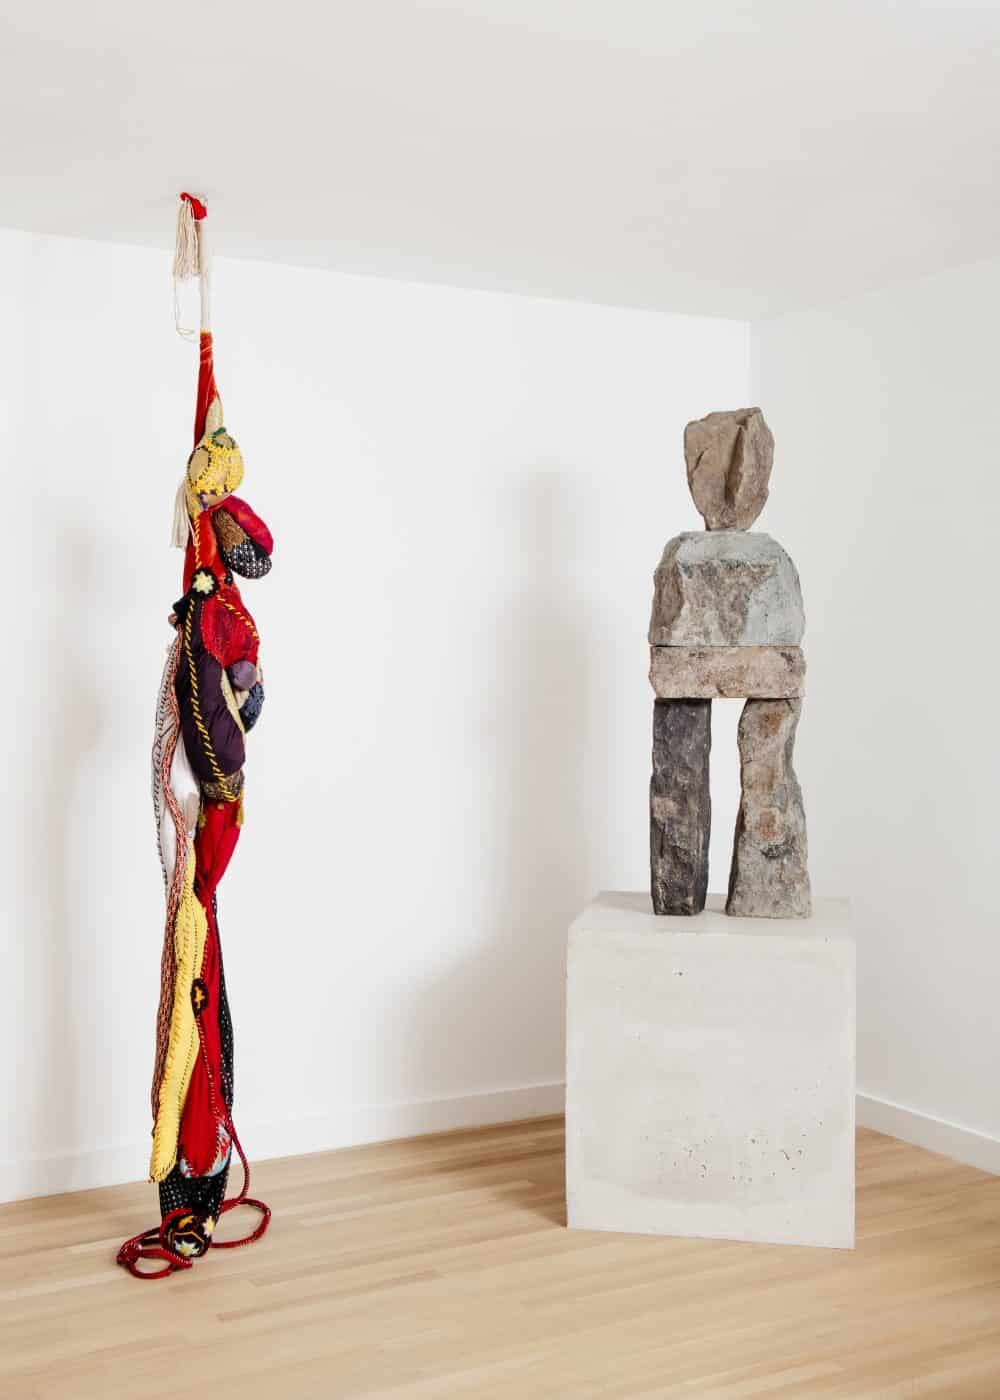 Keith Rivers art collection: Sen Título, de Série Pendentes, 2017, by Sonia Gomes (left) and The Cheeky, 2016, by UGO RONDINONE are among the contemporary creations displayed in the Beverly Hills home of collector Keith Rivers. 